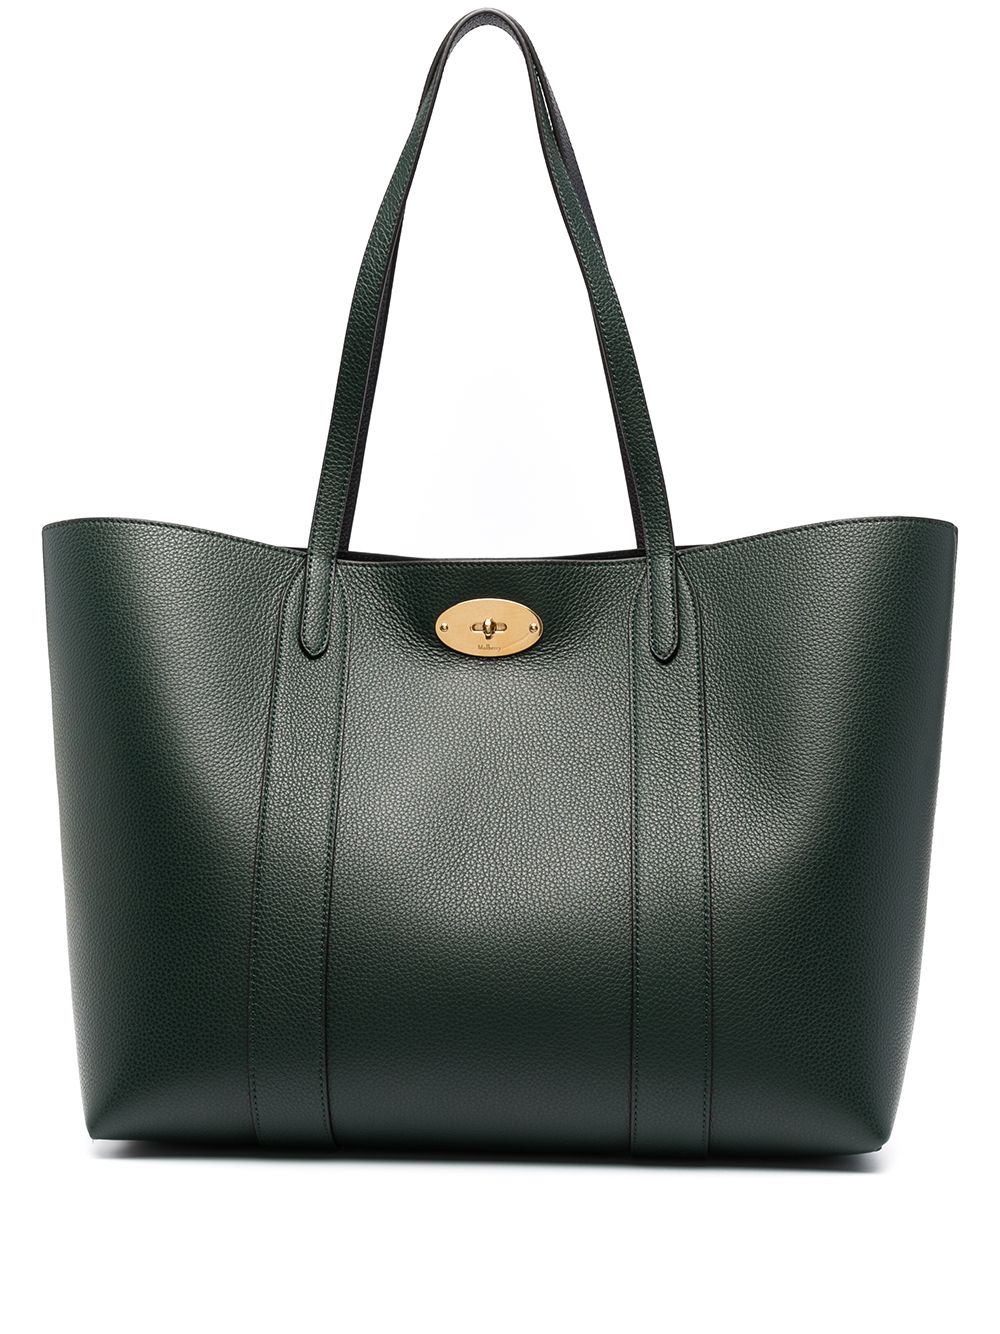 Mulberry small Bayswater tote bag - Green von Mulberry